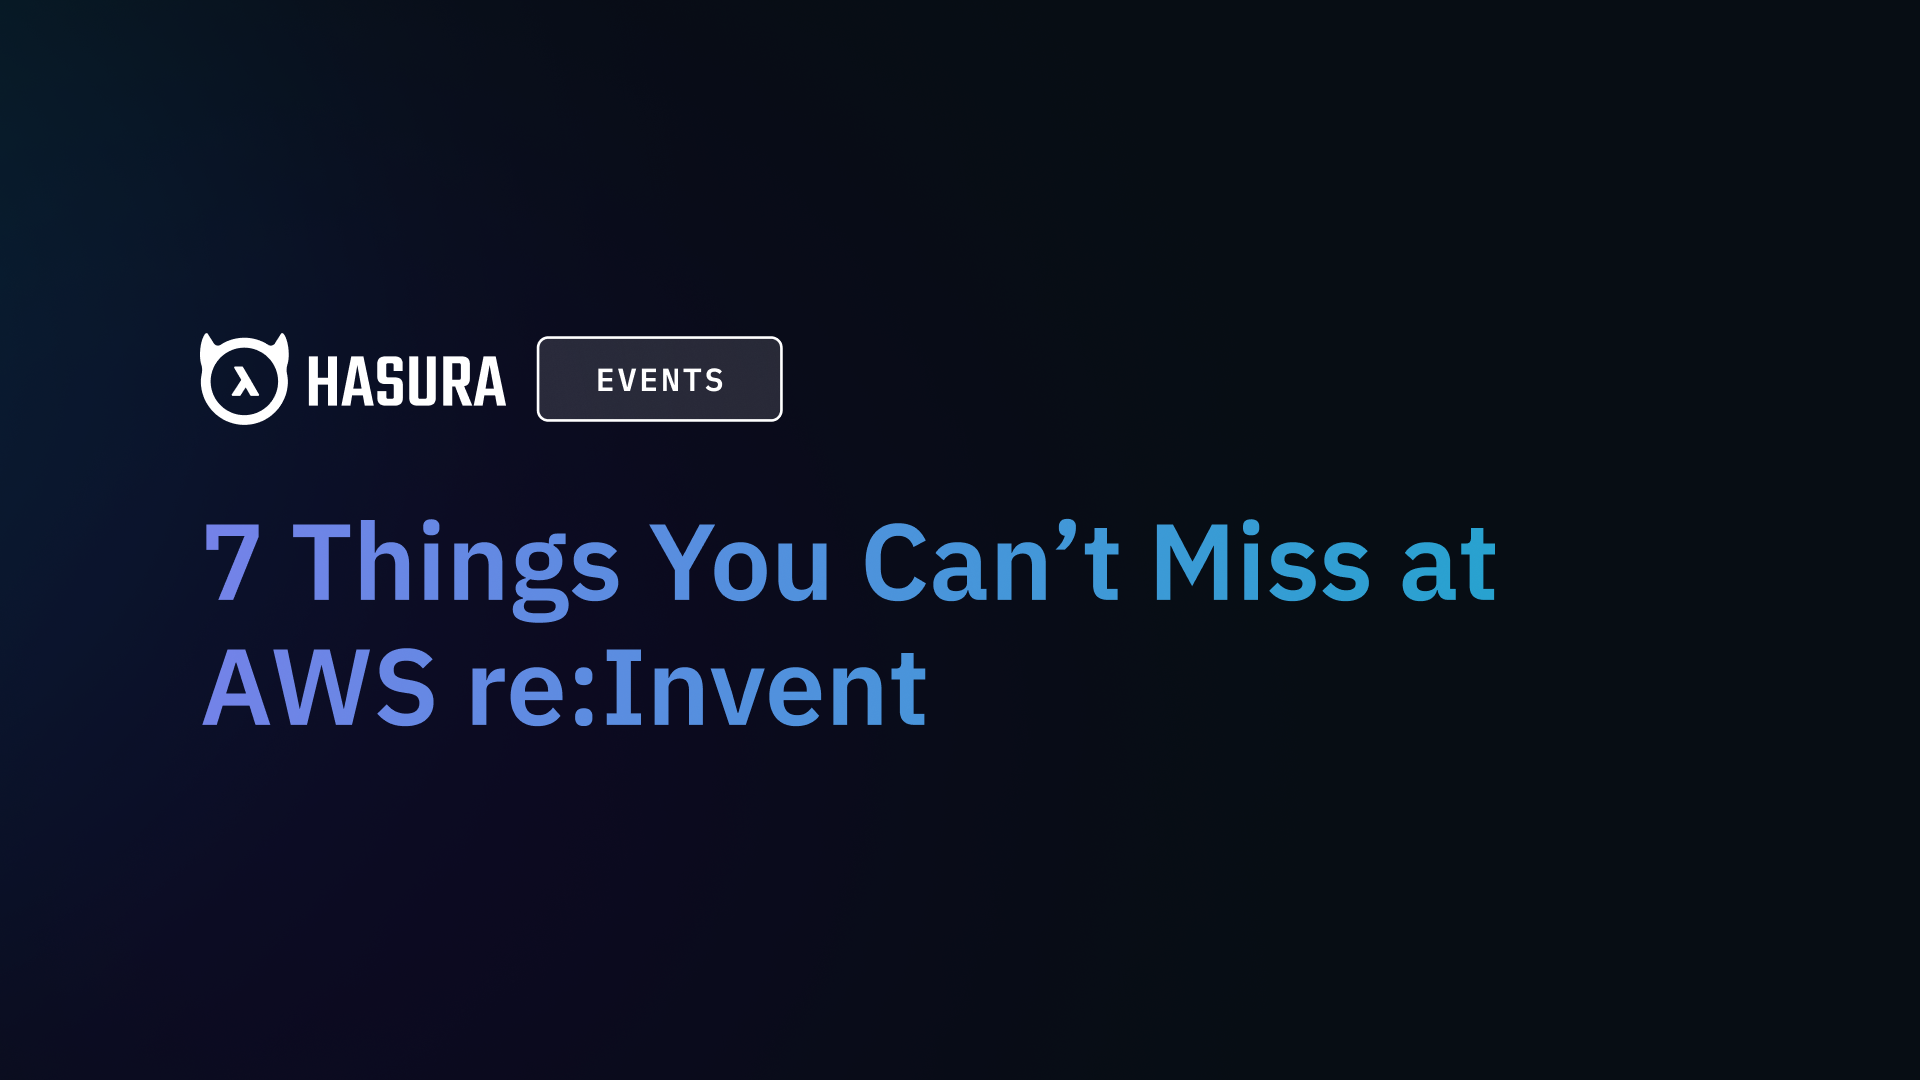 7 Things You Can’t Miss at AWS re:Invent